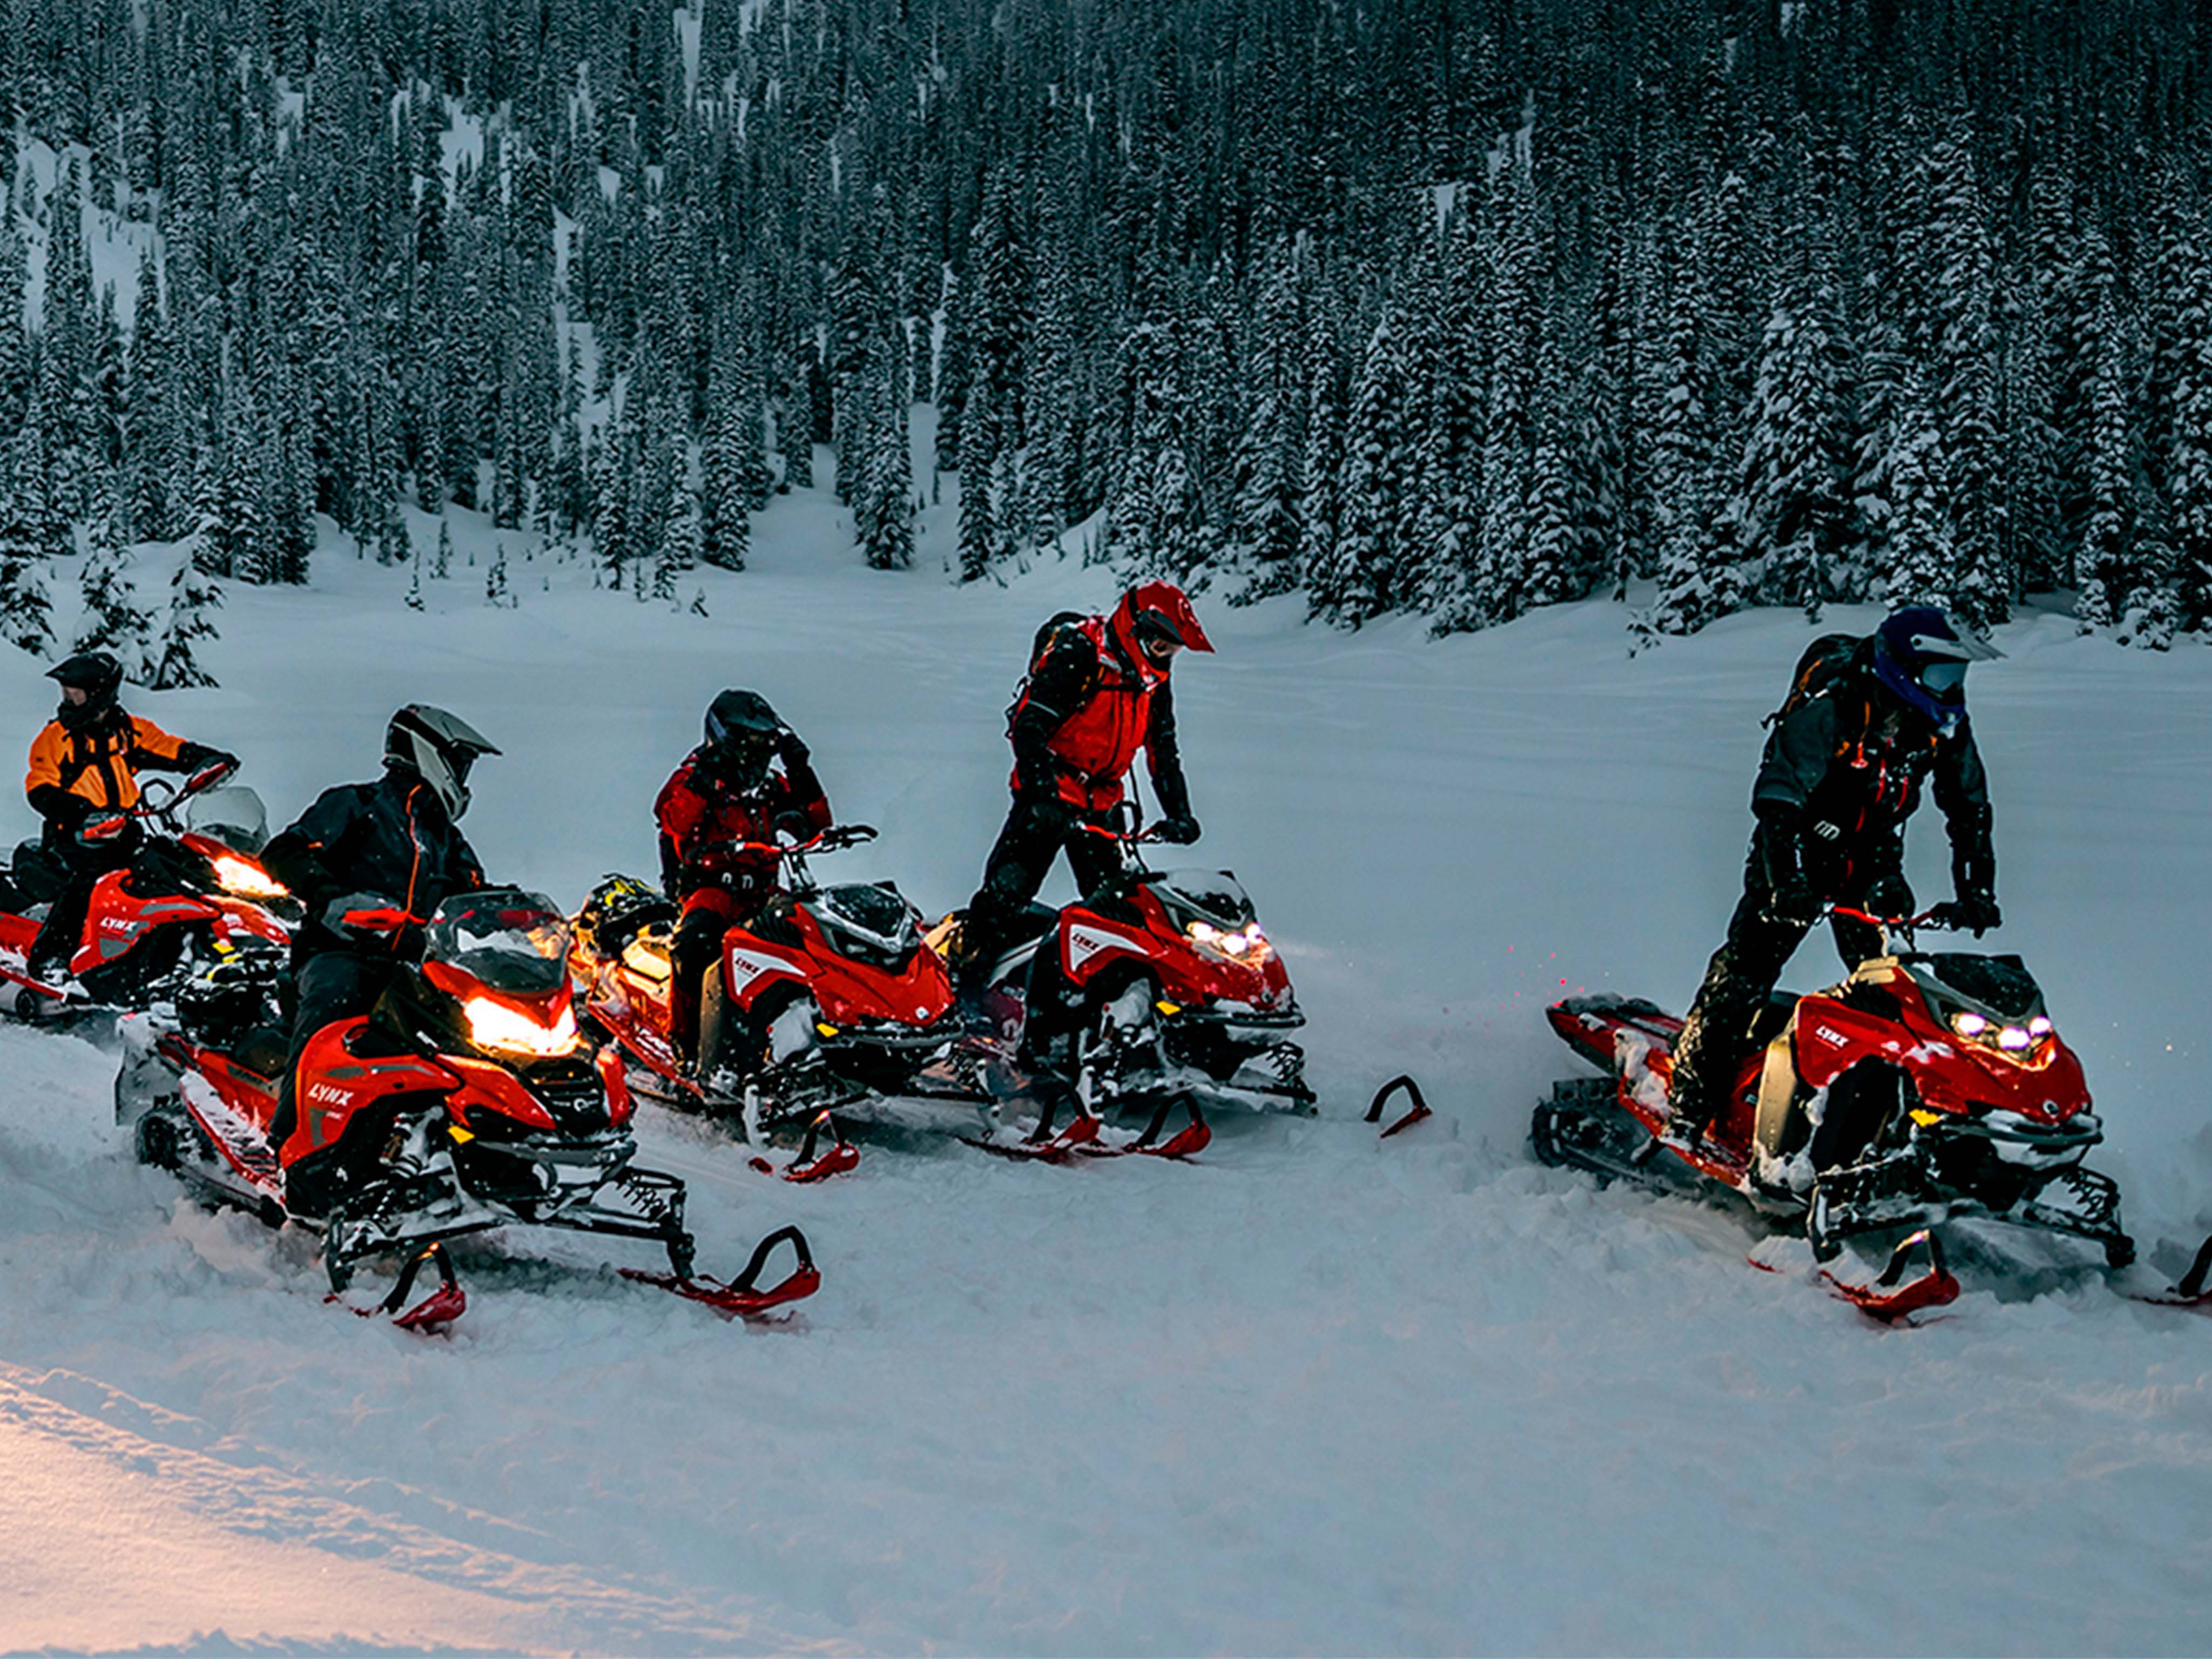 Lynx riders going out for riding.